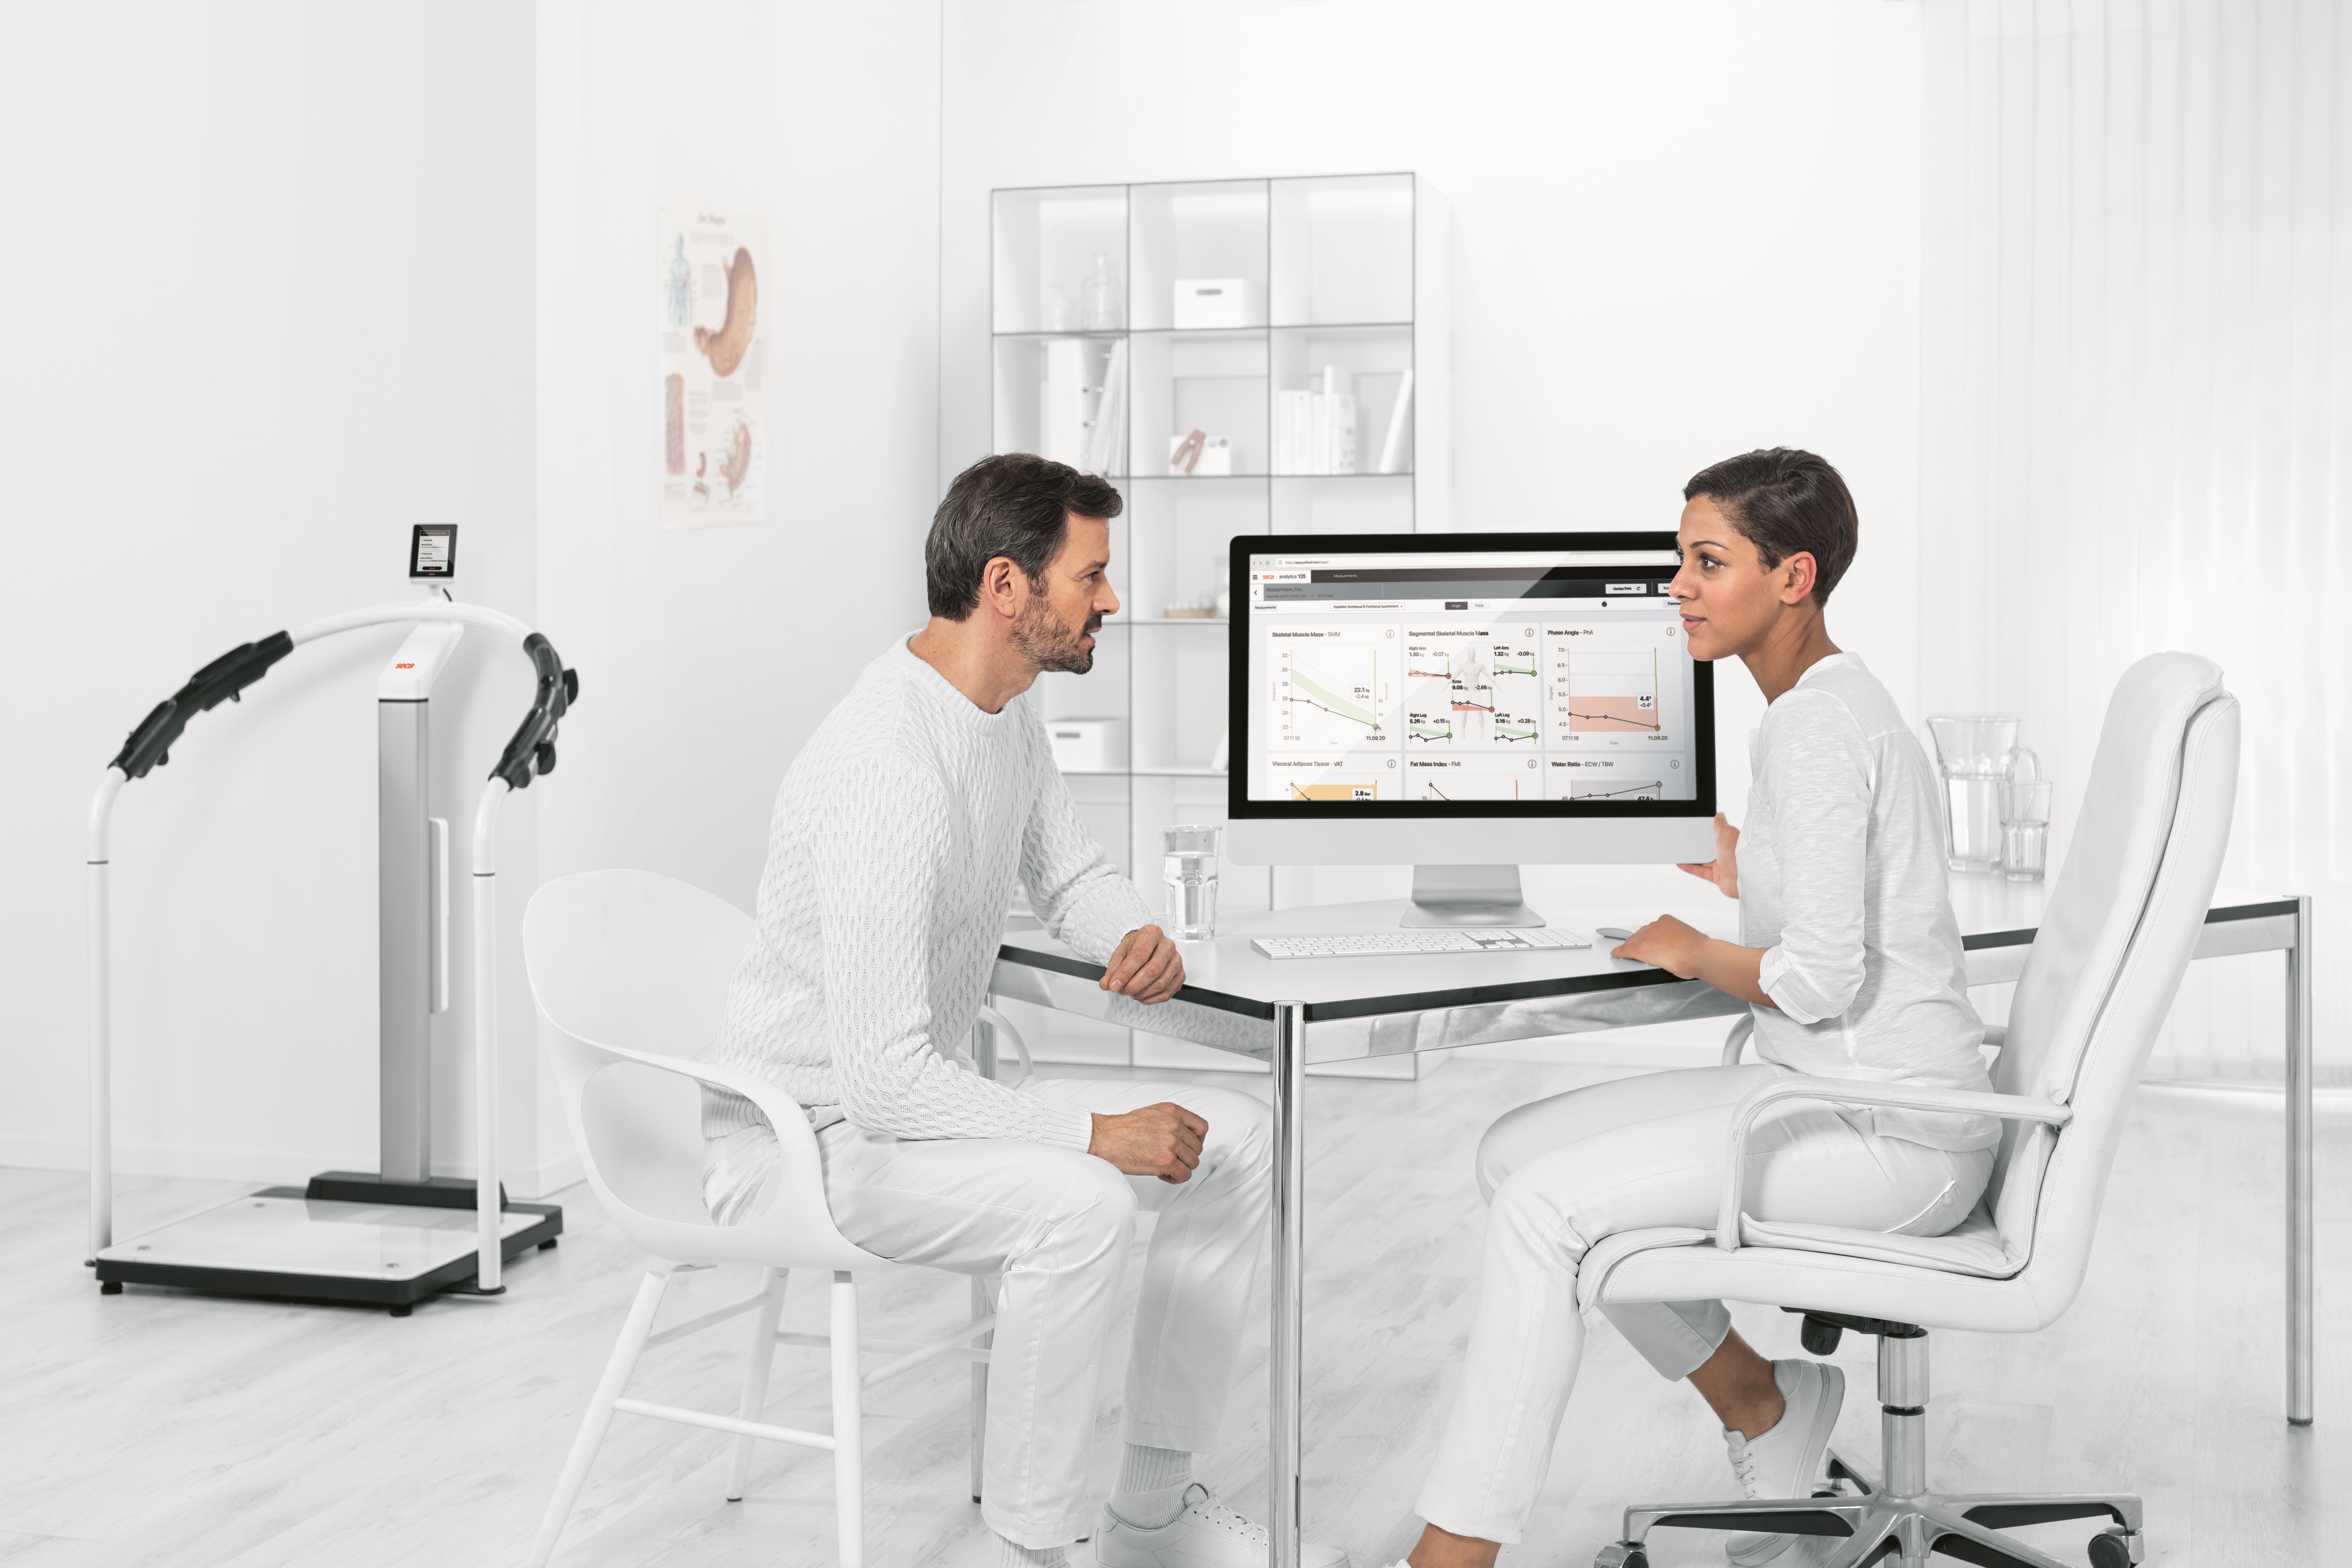 Two healthcare professionals sitting in front of a computer and analyzing data gathered from social media